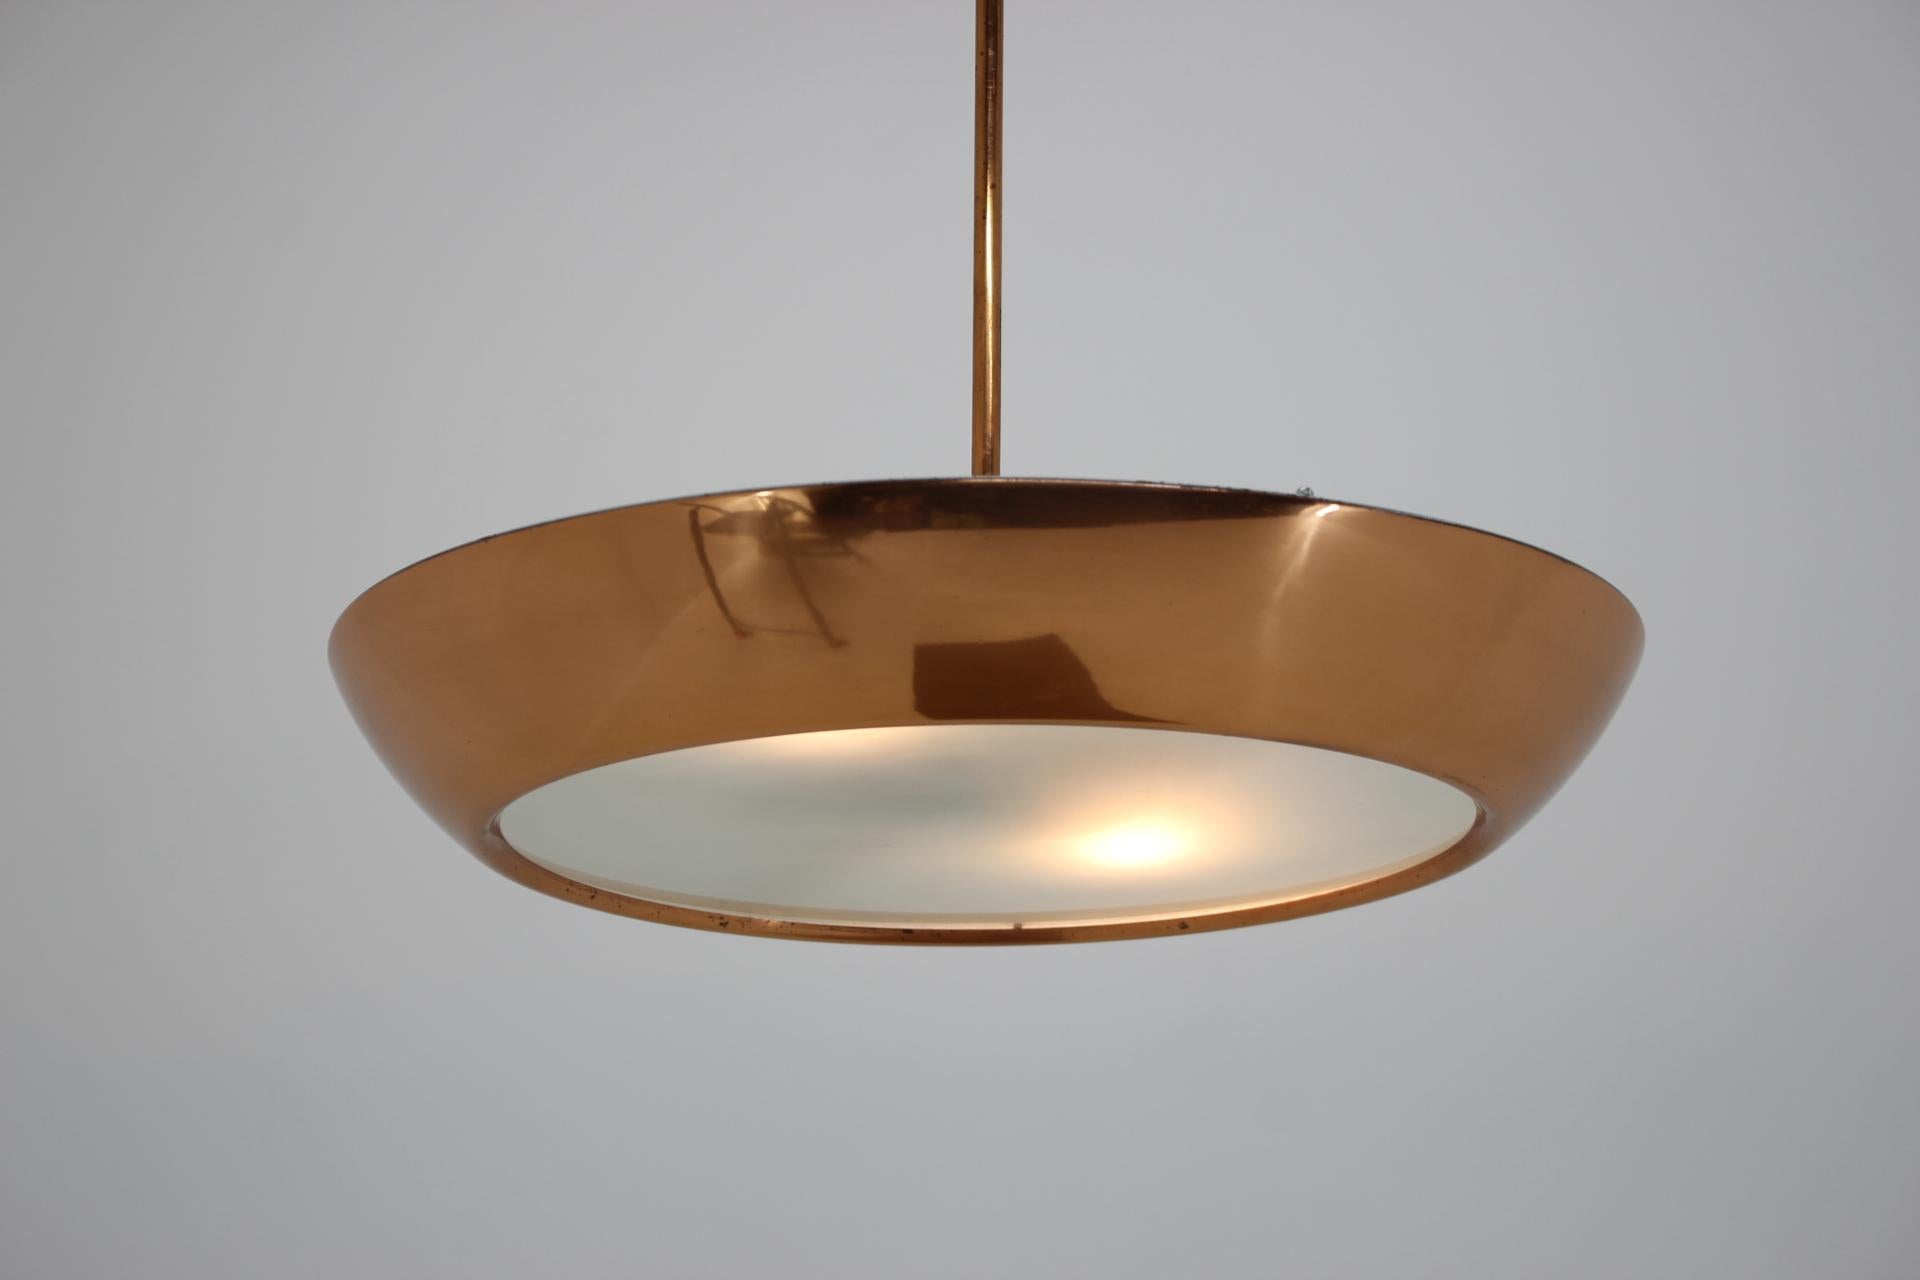 Czech Space Age UFO Brass Pendant by Josef Hurka for Napako, 1950s For Sale